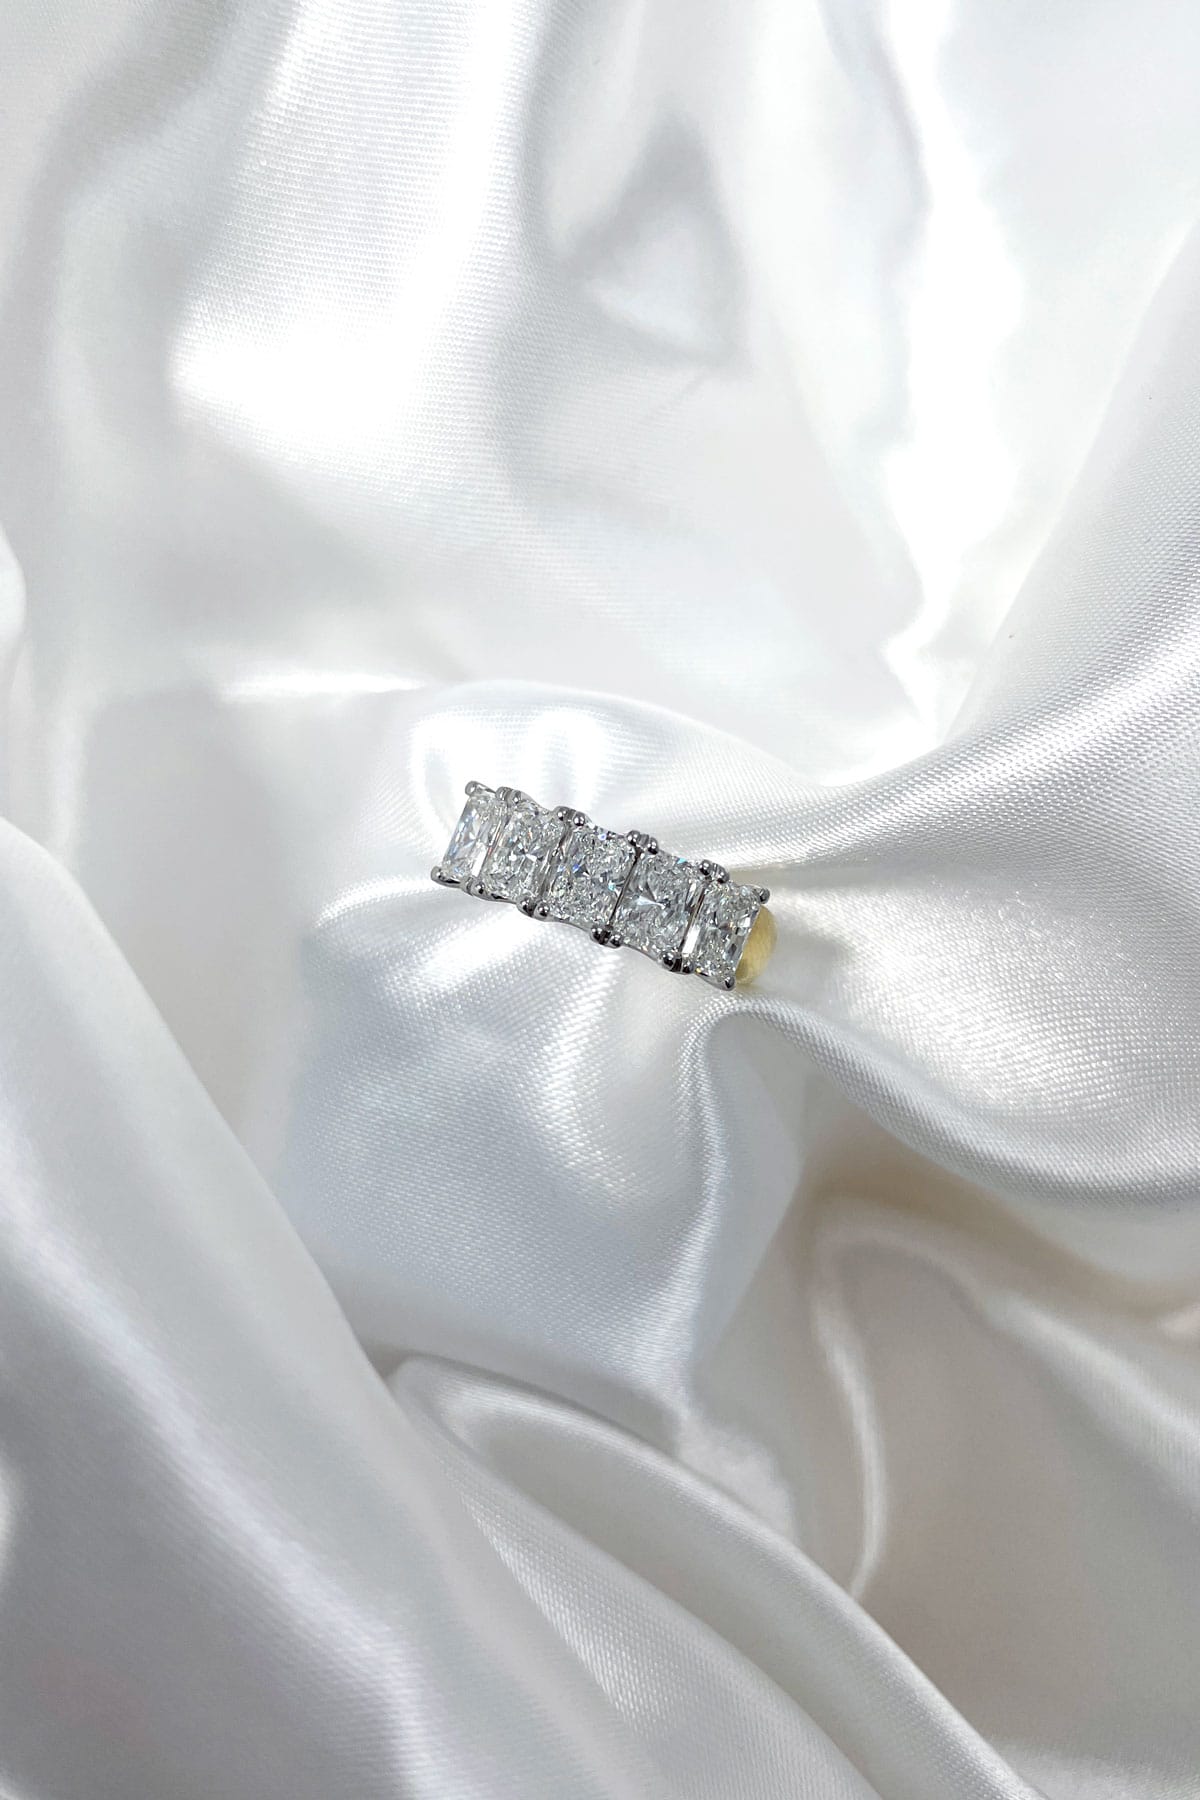 2.56ct Diamond Set Ring set in 18ct Yellow and White Gold. Available at LeGassick Diamonds & Jewellery Gold Coast, Australia.